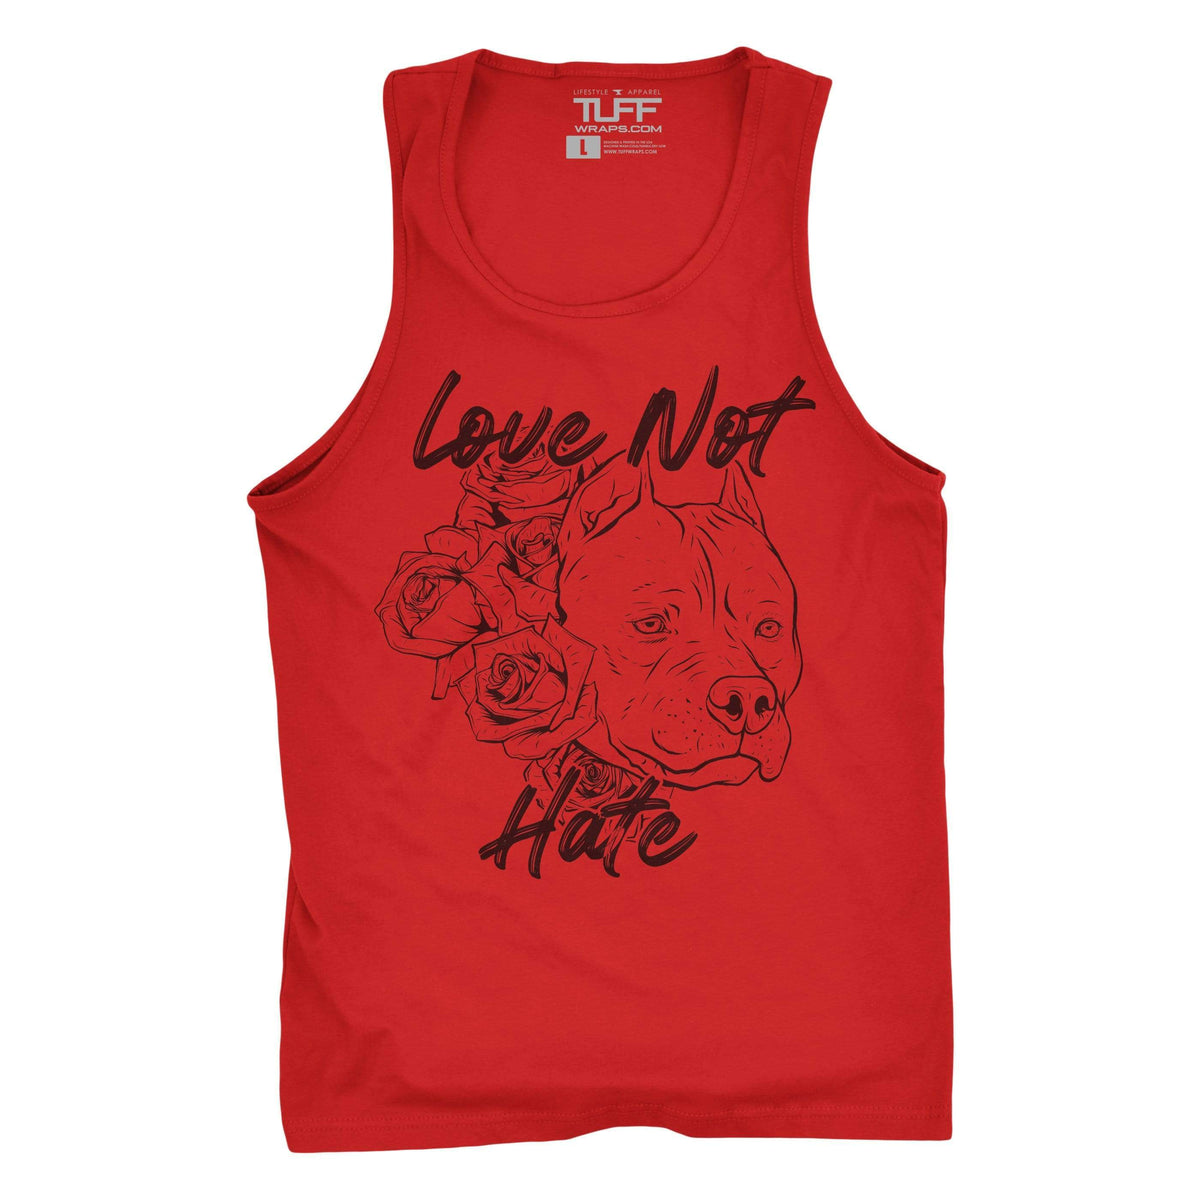 Love Not Hate Tank S / Red TuffWraps.com